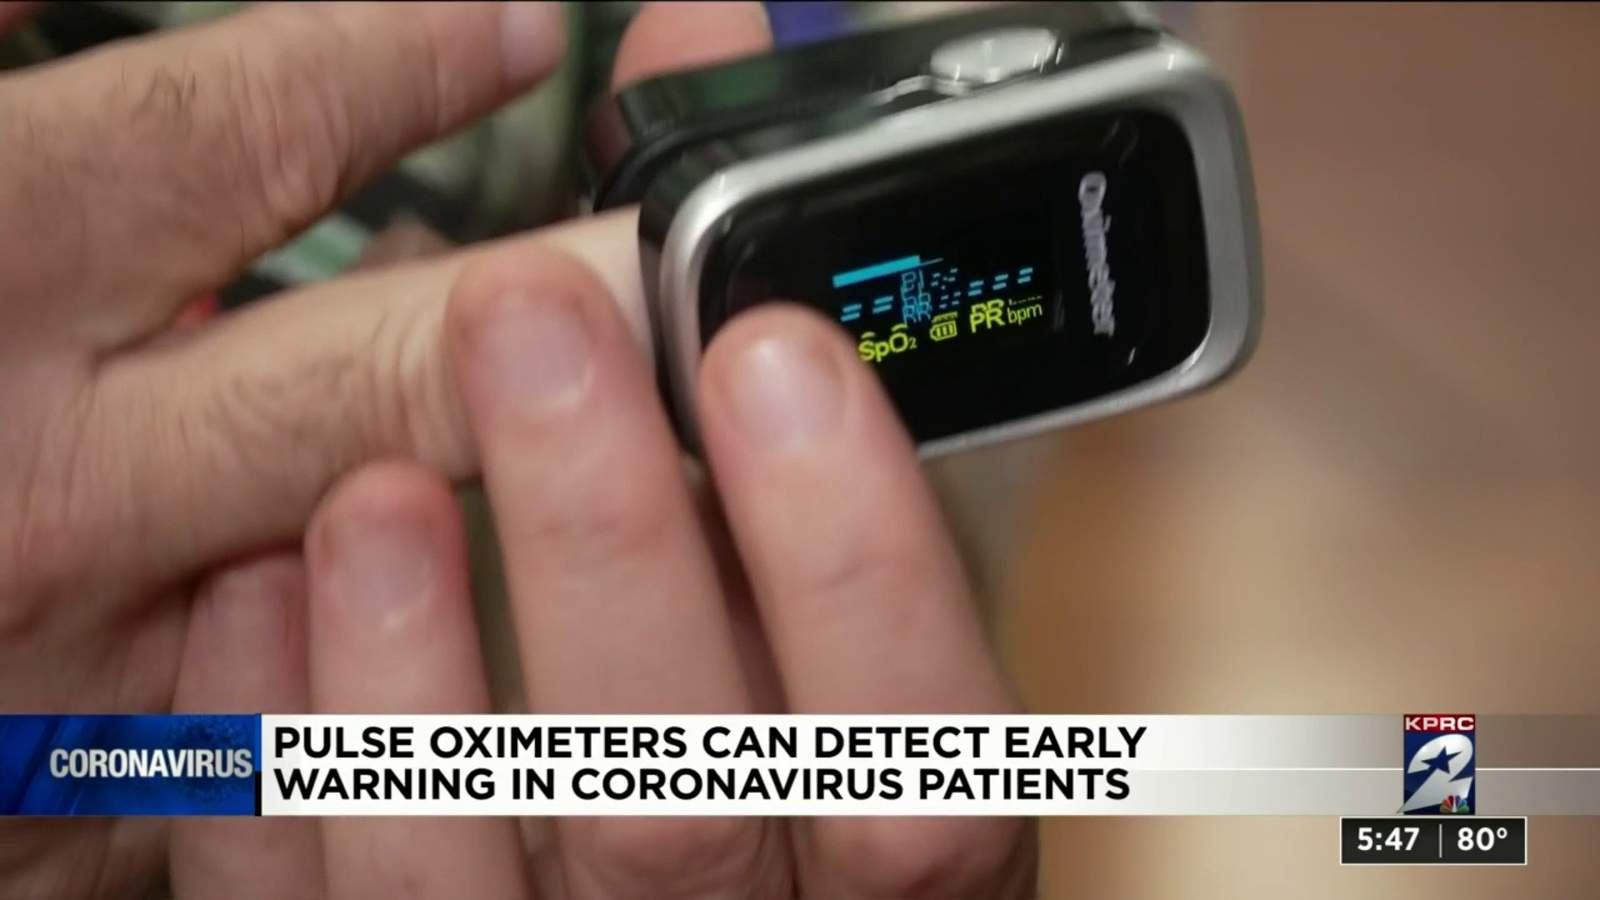 Why some people are buying pulse oximeters during coronavirus